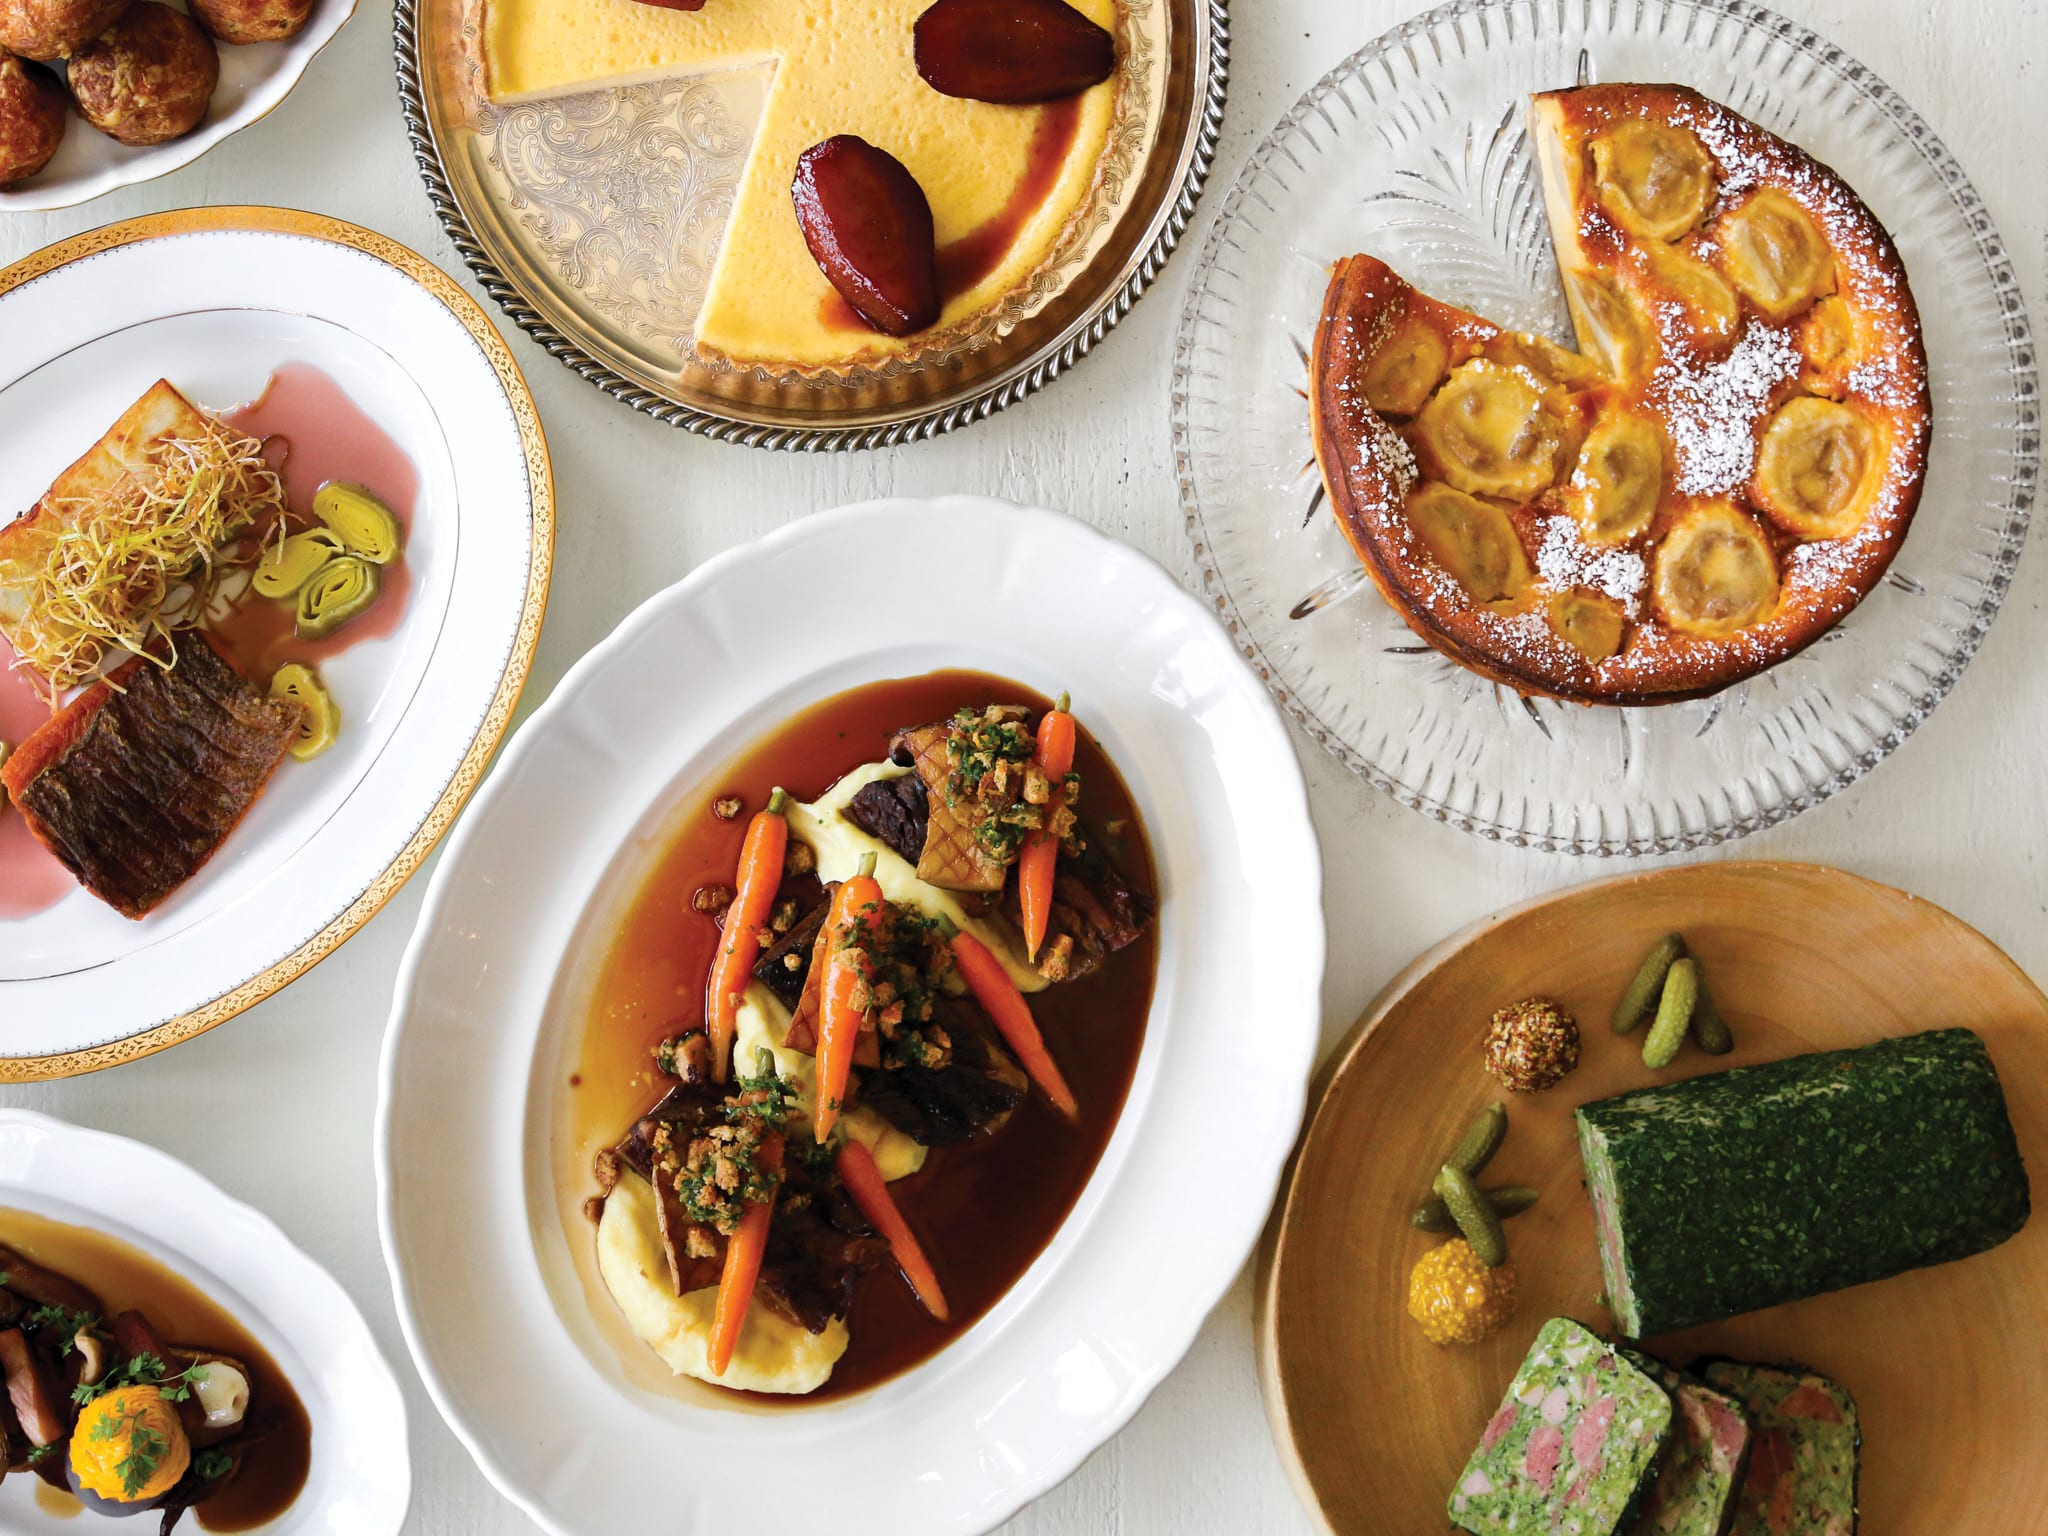 A selection of Francophile delicacies from the regional French menu series